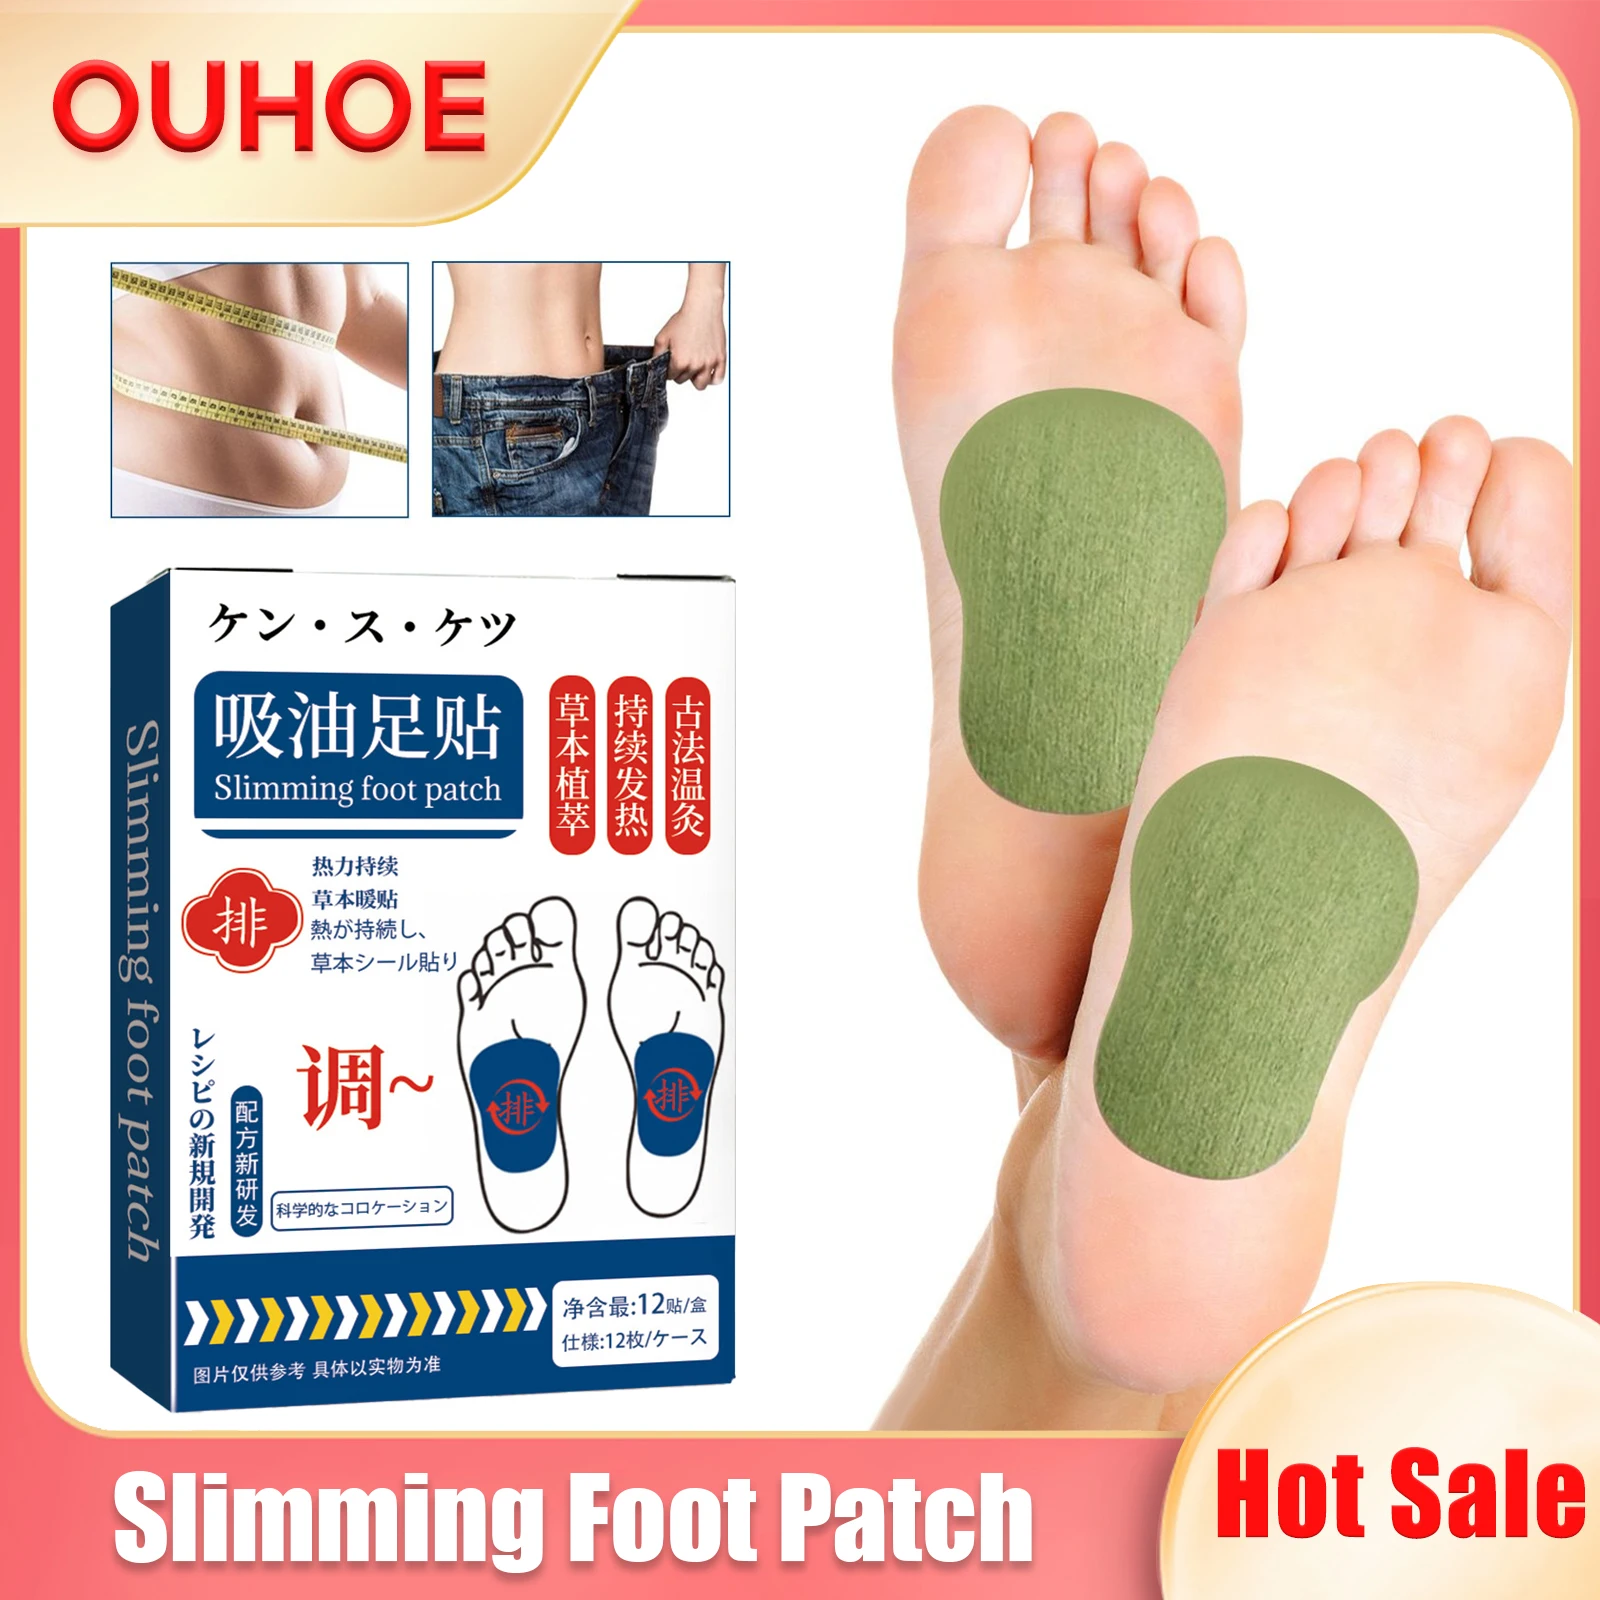 

Slimming Foot Patch Weight Loss Relieve Fatigue Stress Dehumidification Detox Firming Lifting Body Hot Remove Toxin Feet Patches